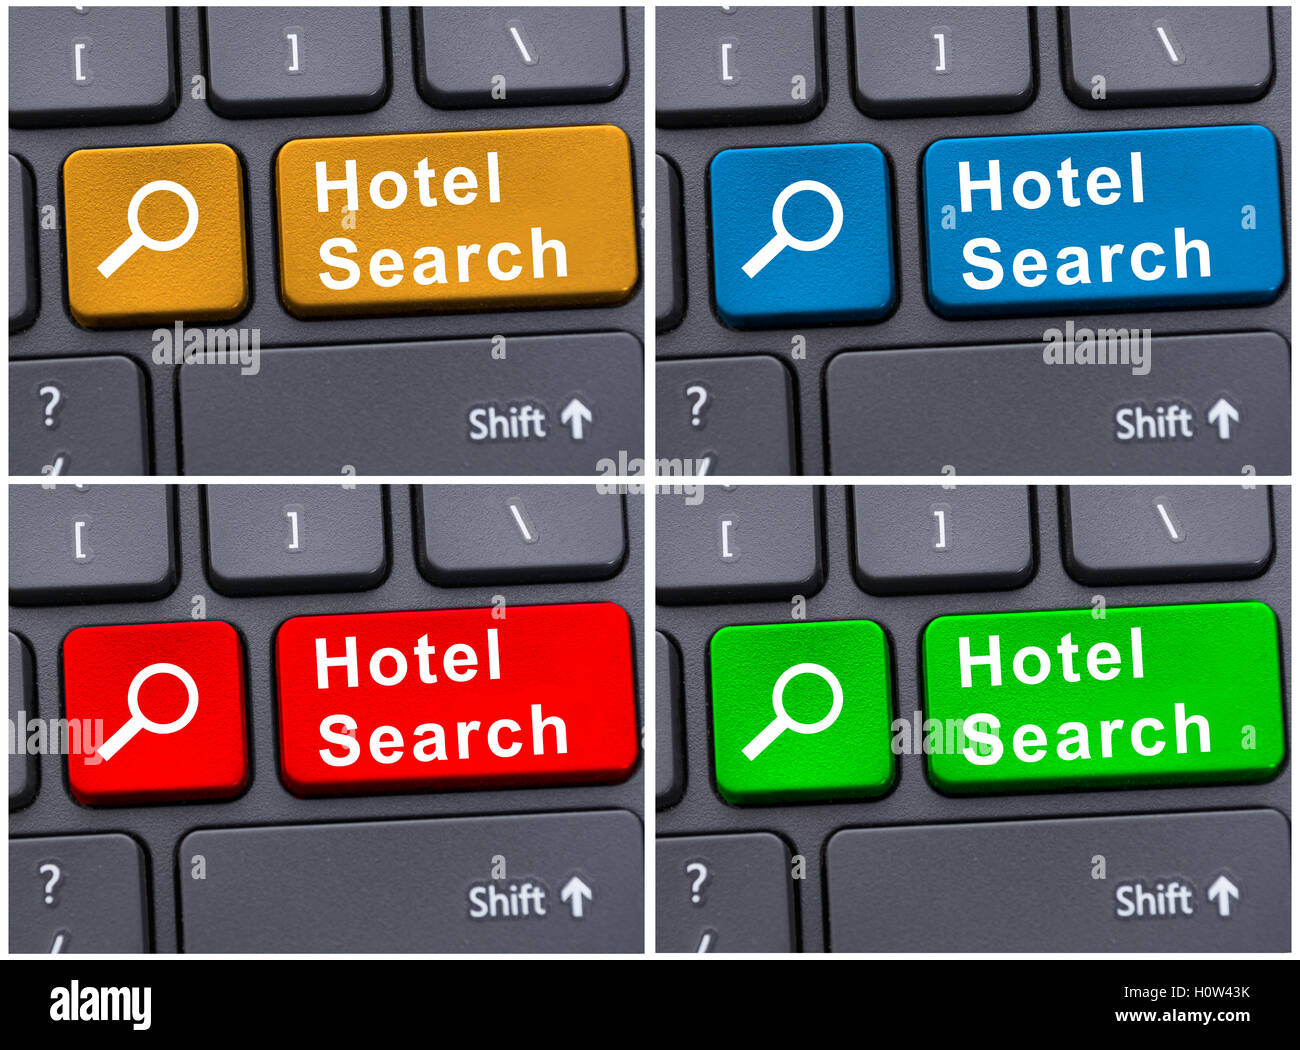 Online reservation or last minute booking with hotel search button Stock Photo